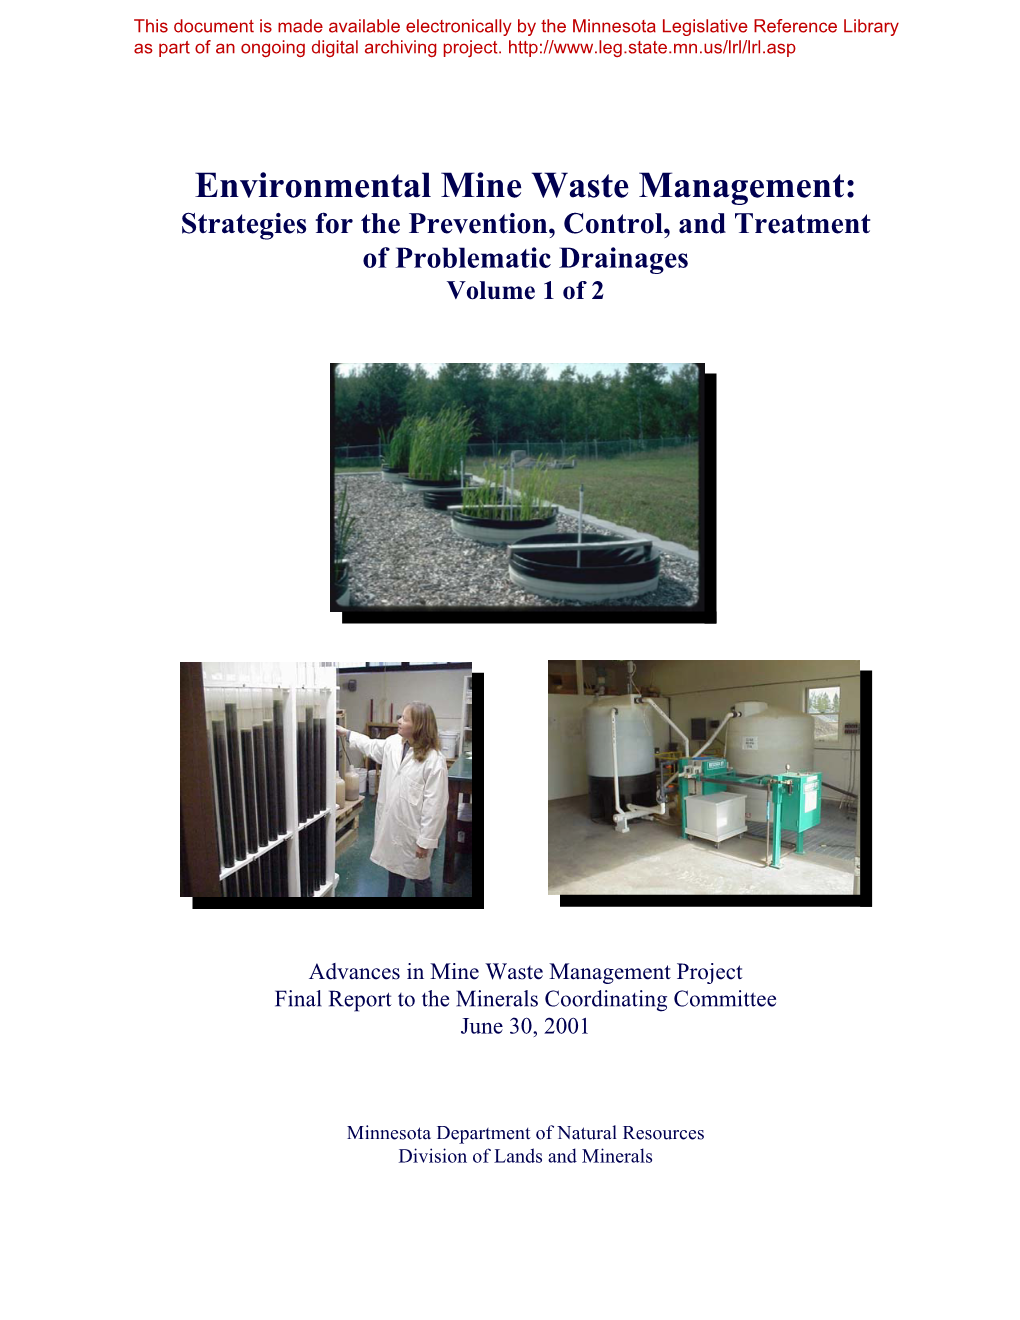 Environmental Mine Waste Management: Strategies for the Prevention, Control, and Treatment of Problematic Drainages Volume 1 of 2